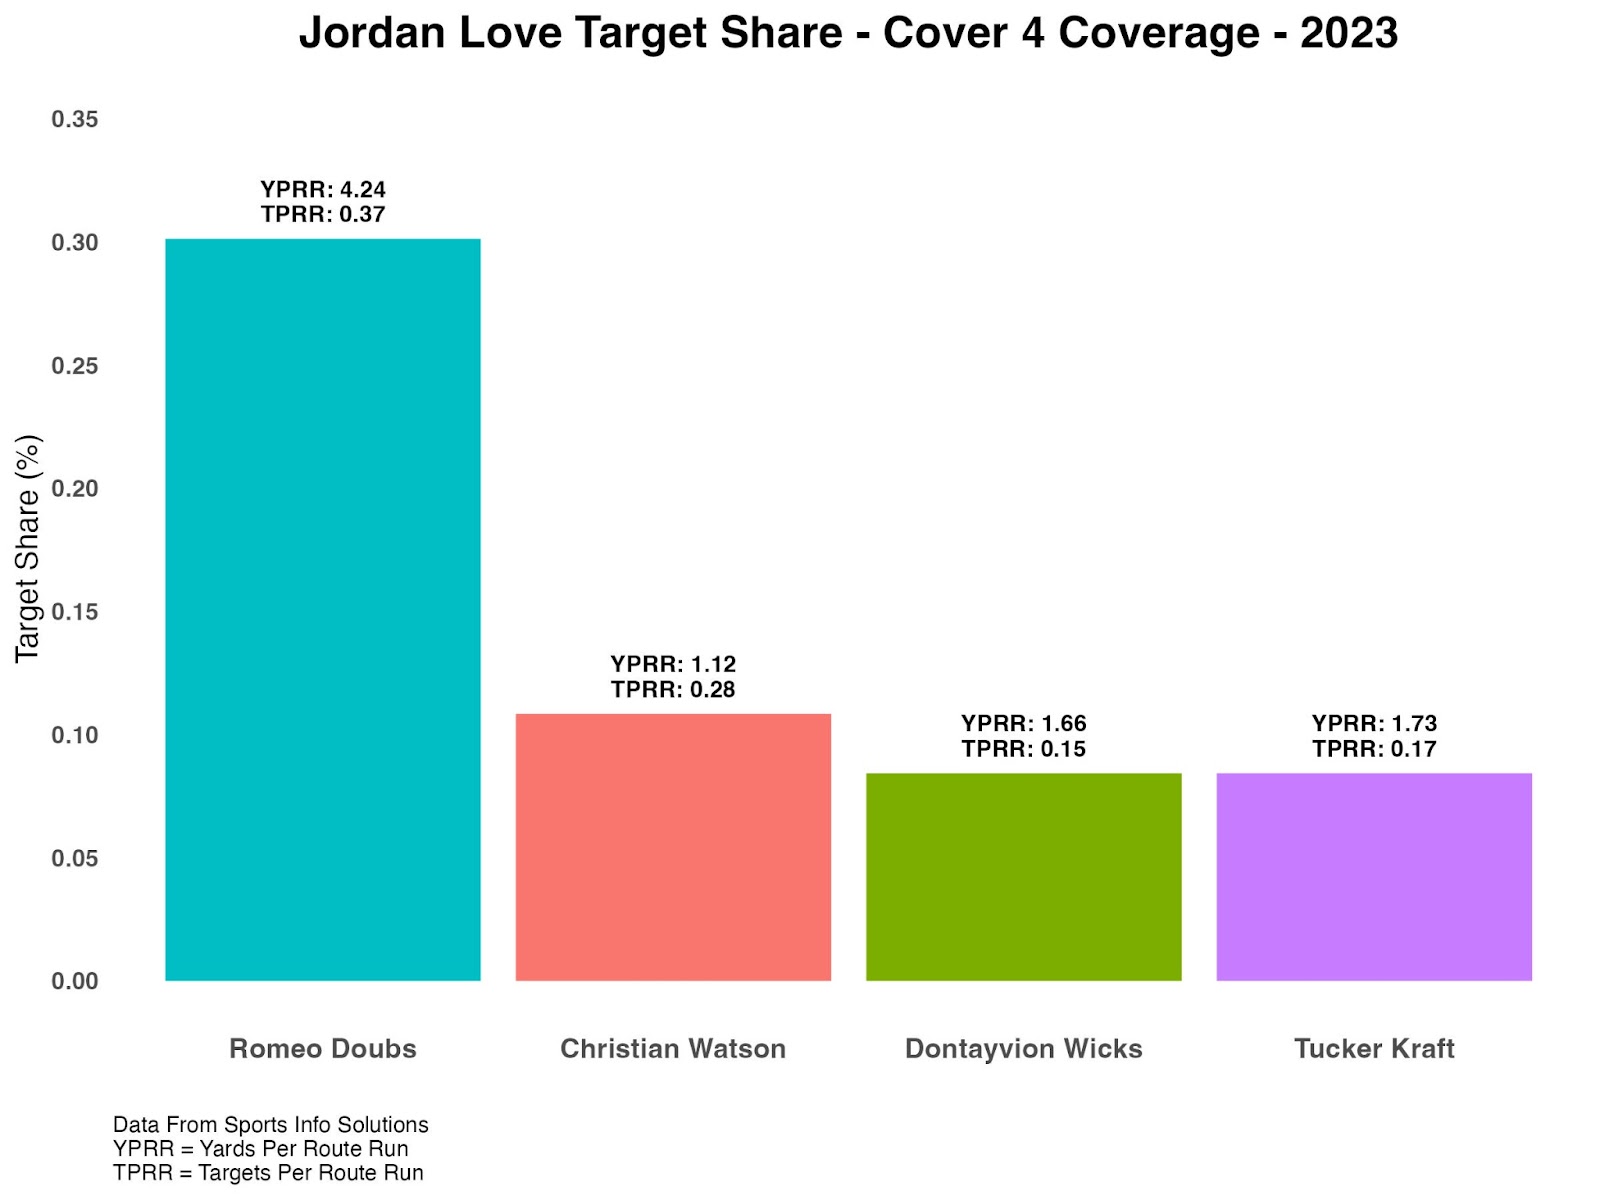 Jordan Love Target Share bar graph in Cover 4 coverage with Romeo Doubs (1st), Christian Watson (2nd), Dontayvion Wicks (3) and Tucker Kraft (4)